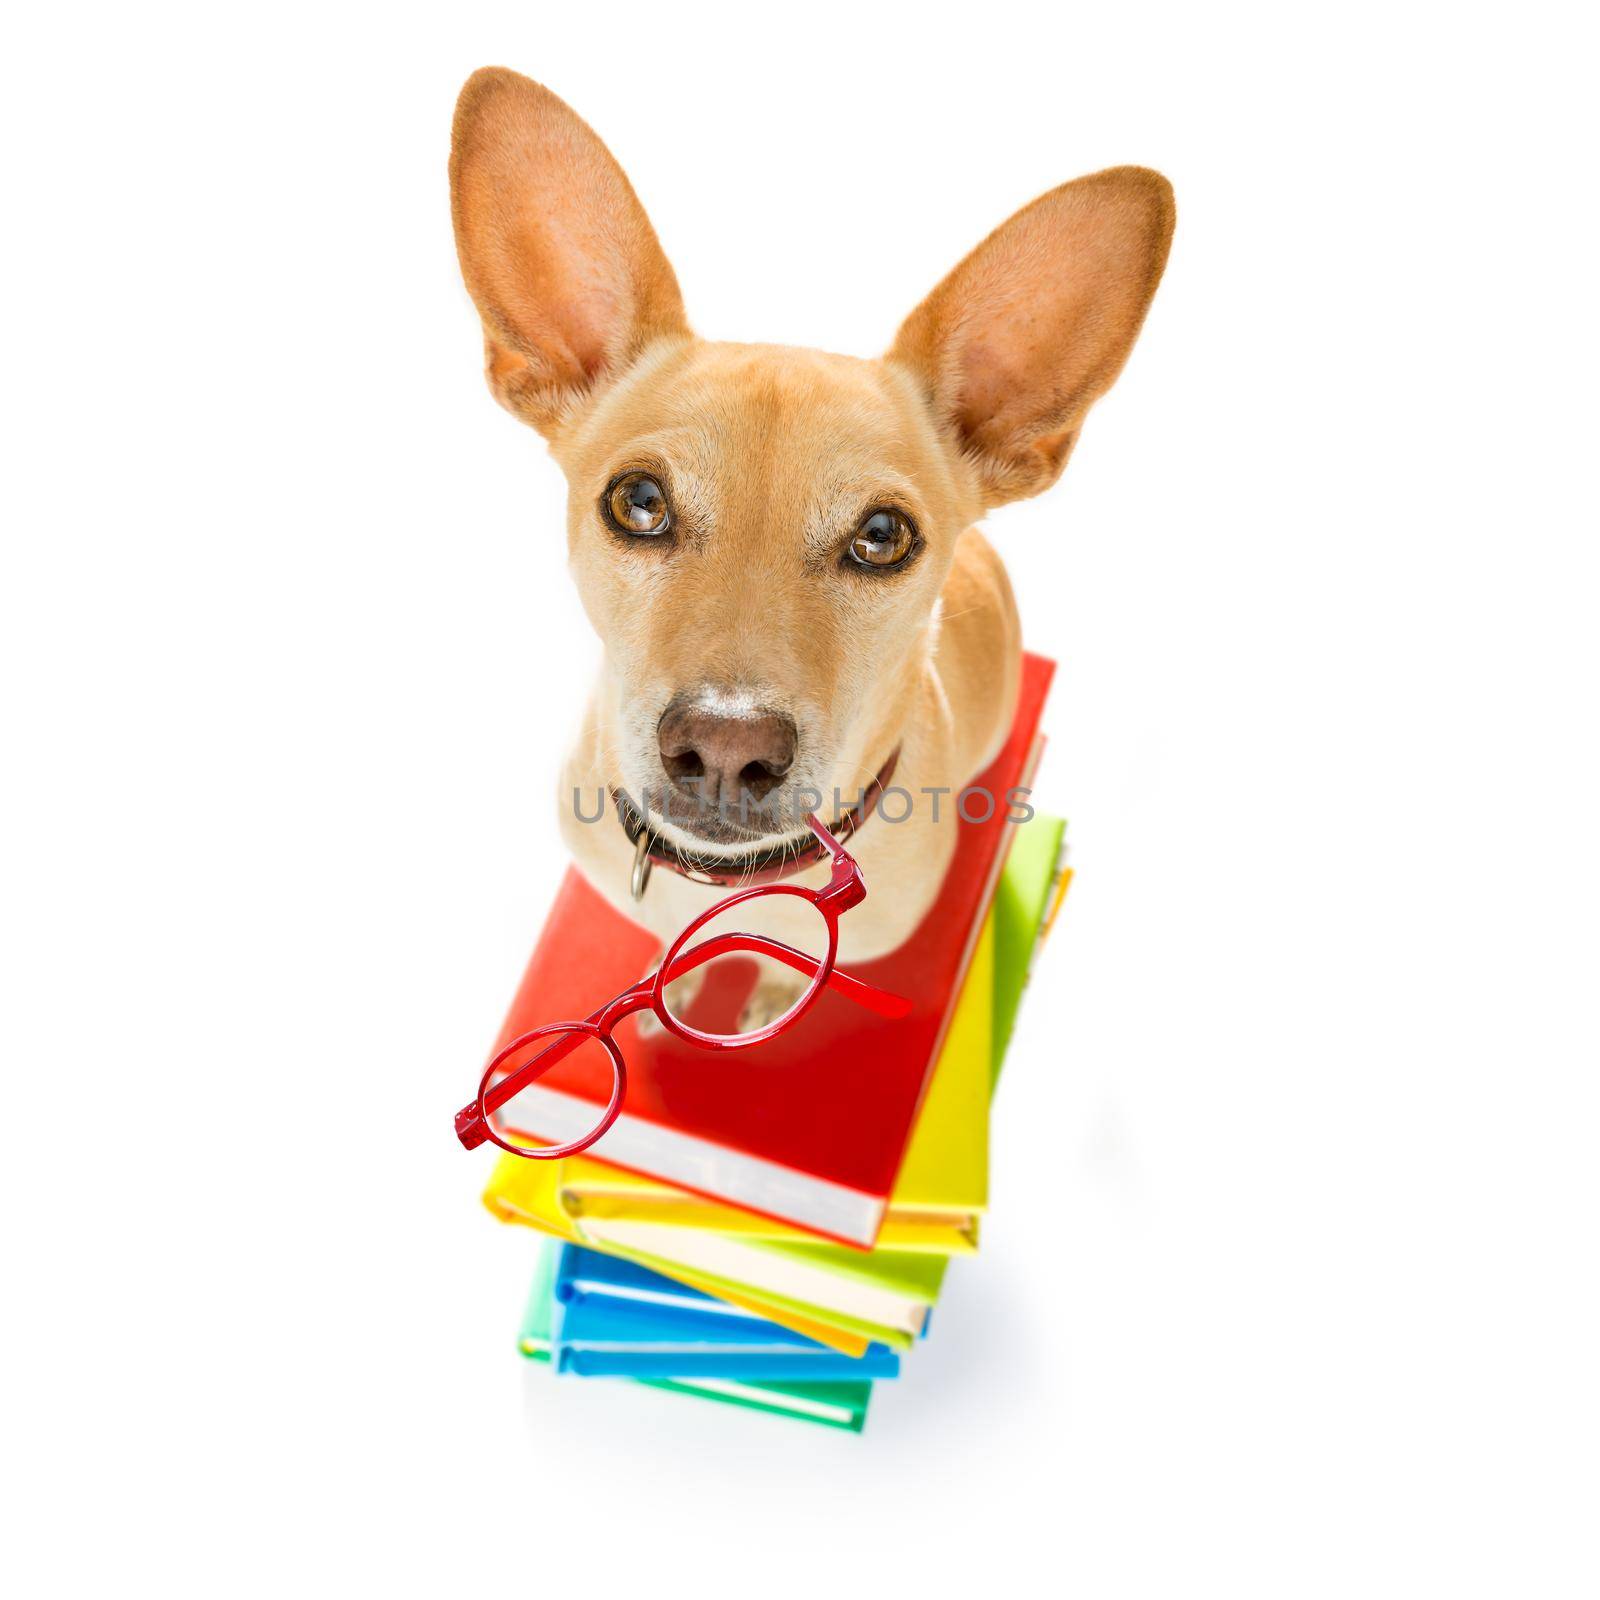 chihuahua dog on  a tall stack of books ,very smart and clever , isolated on white background